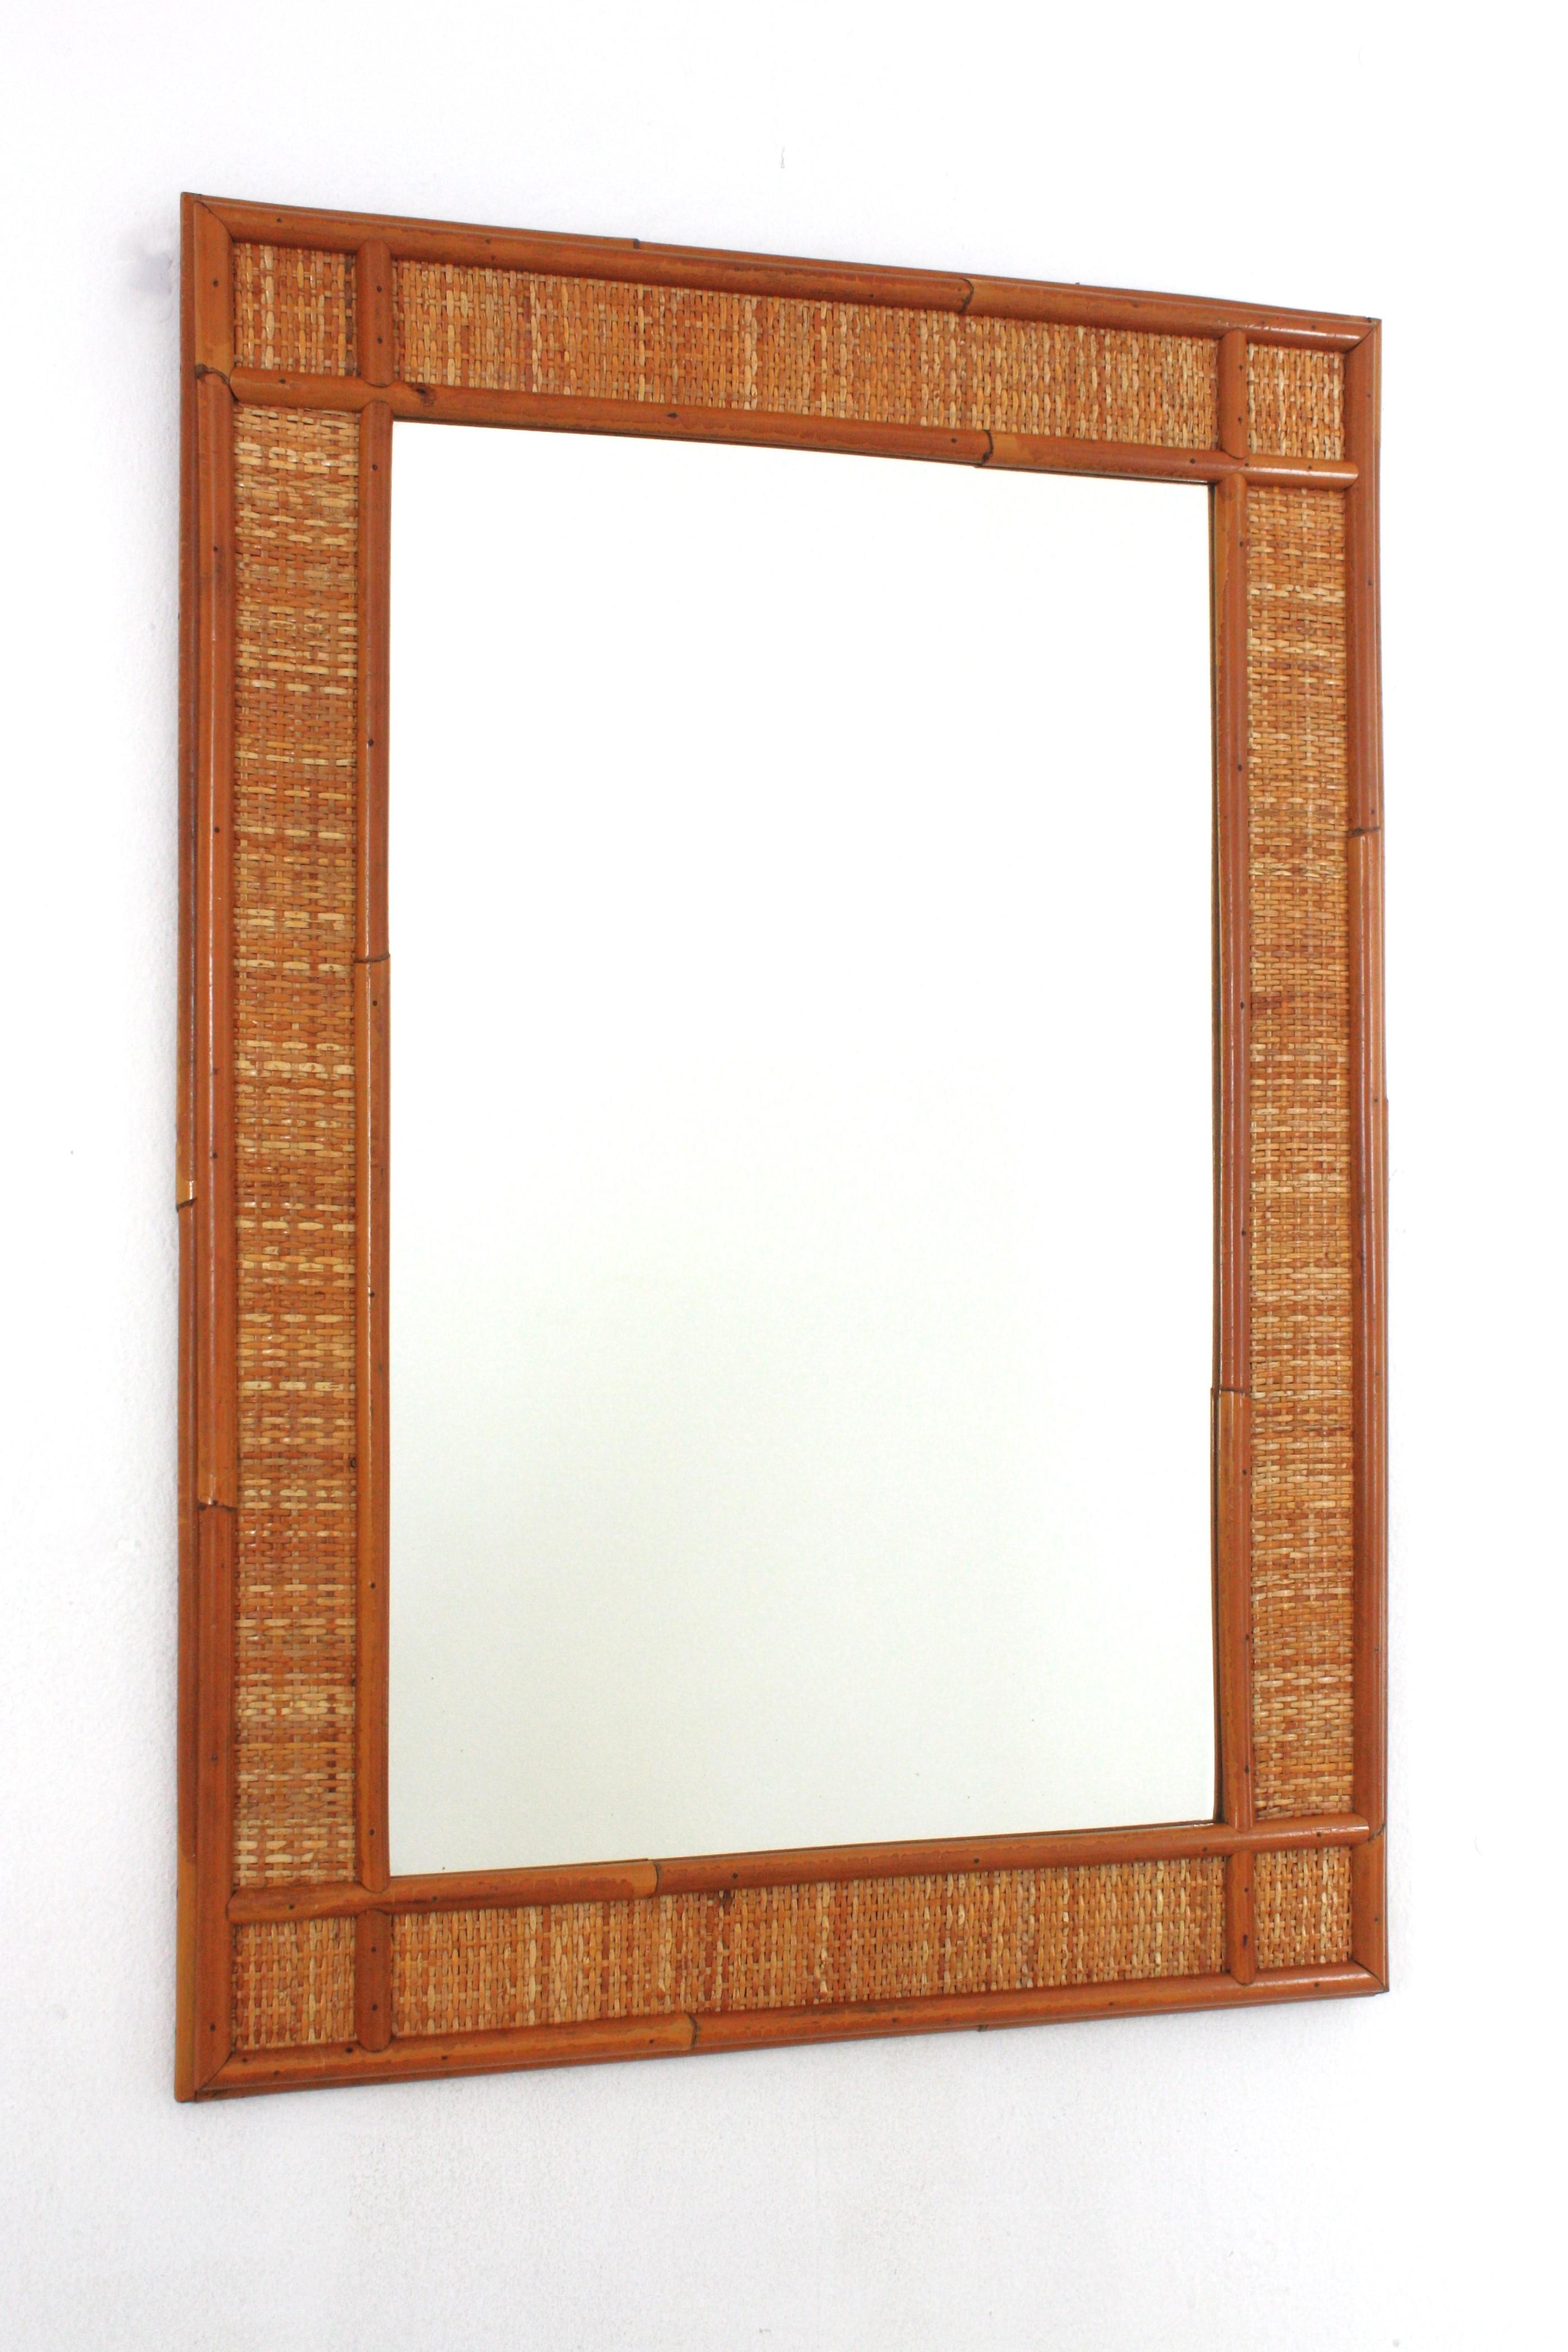 Large Rectangular Midcentury Wall Mirror framed in Rattan and Wicker, Spain, 1960-1970.
Elegant mid-20th century woven wicker and rattan mirror. Cross details on the corners. Eye-catching coastal design with all the taste of the Italian Riviera,